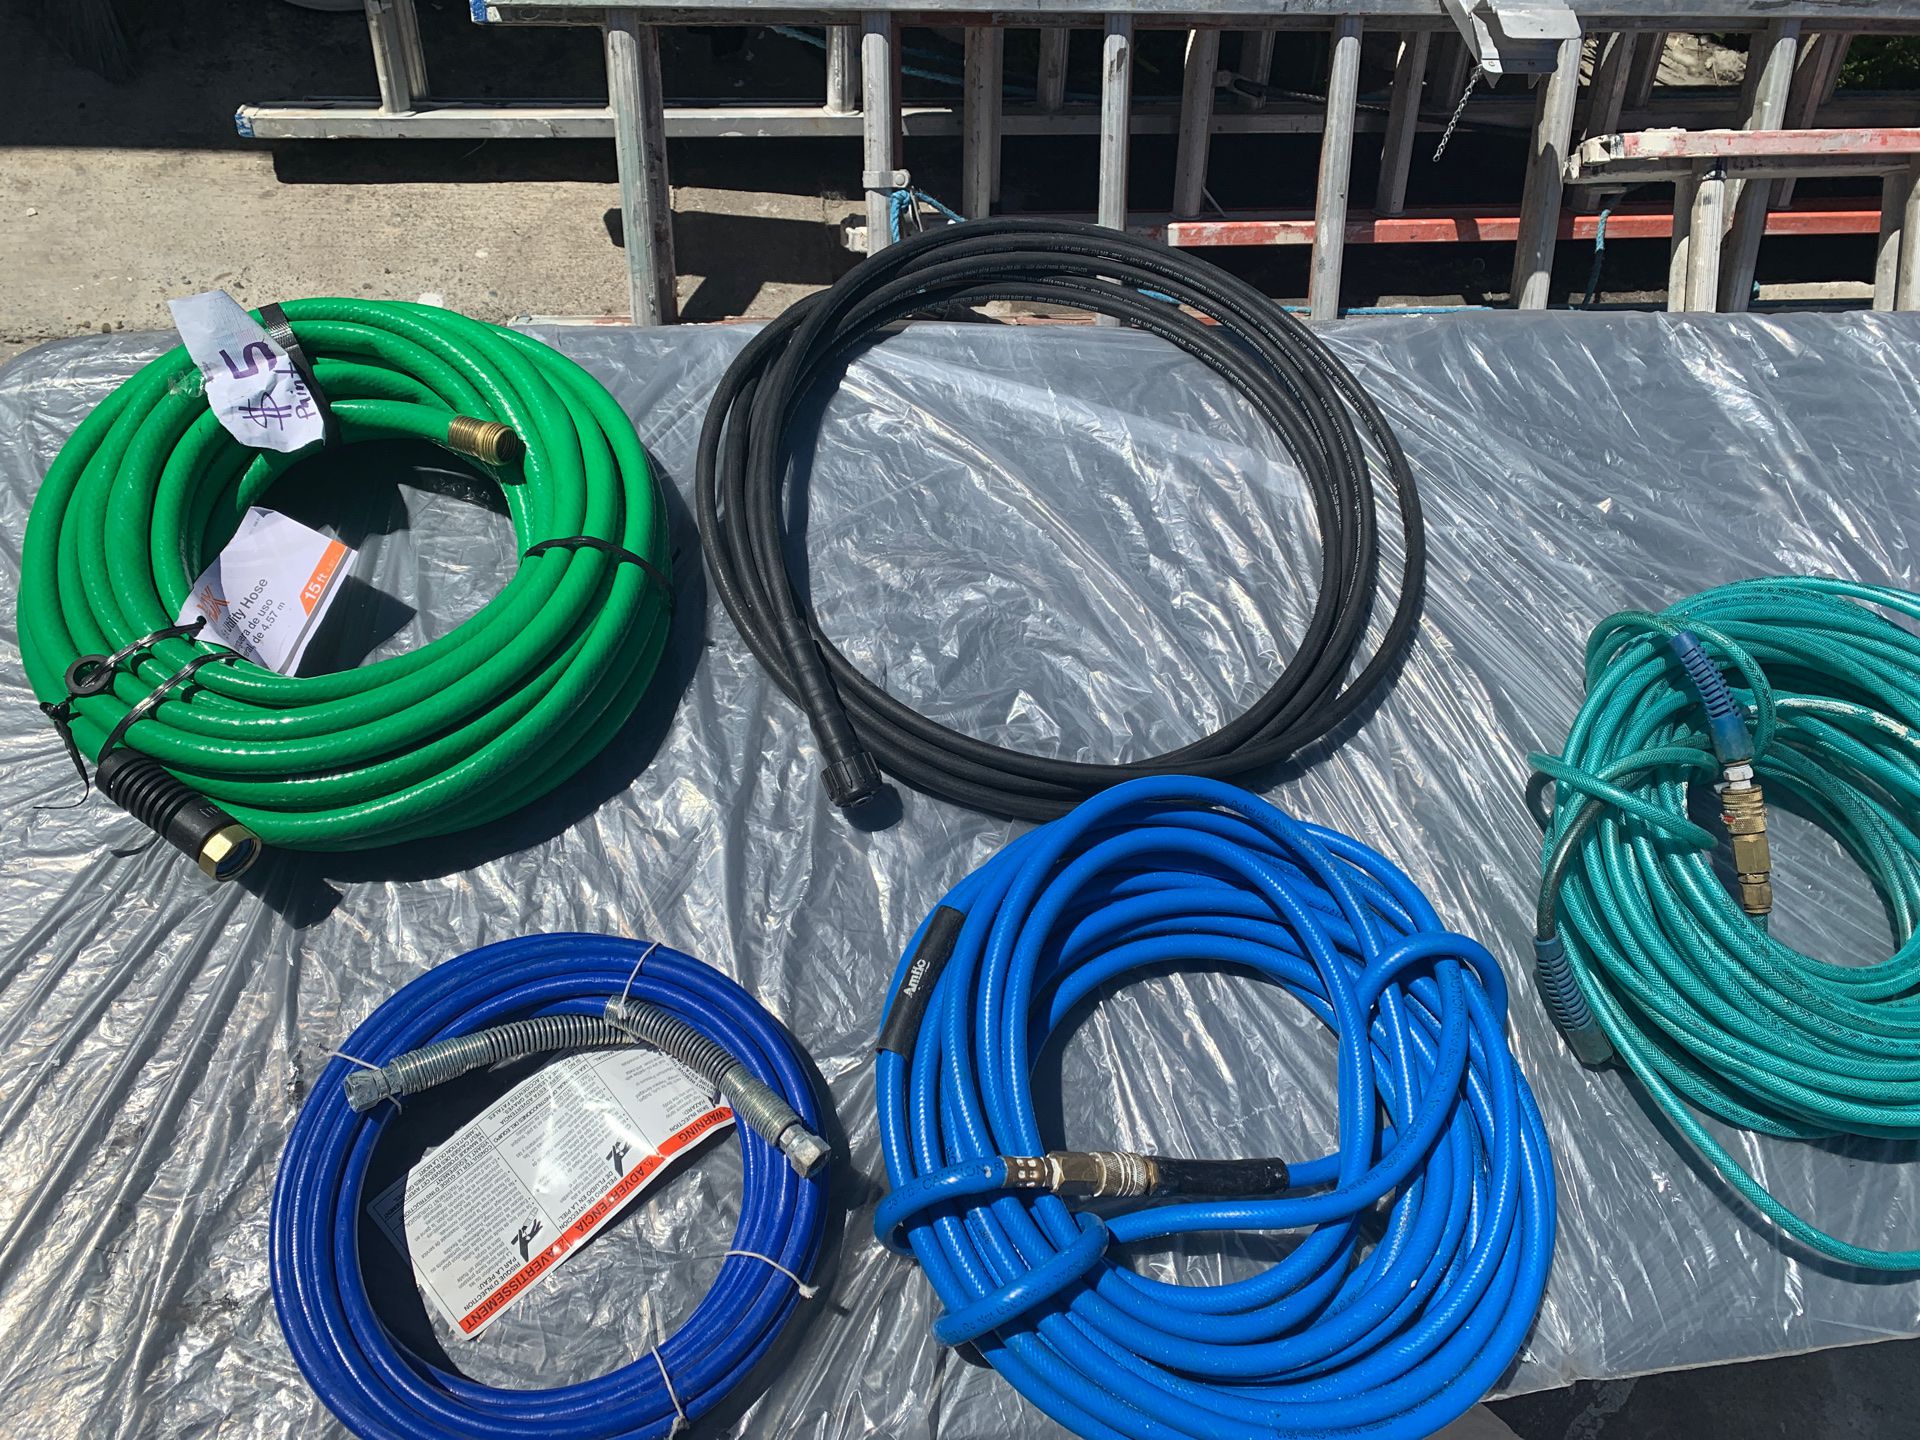 Hoses new an used for sale 5 & 10 each